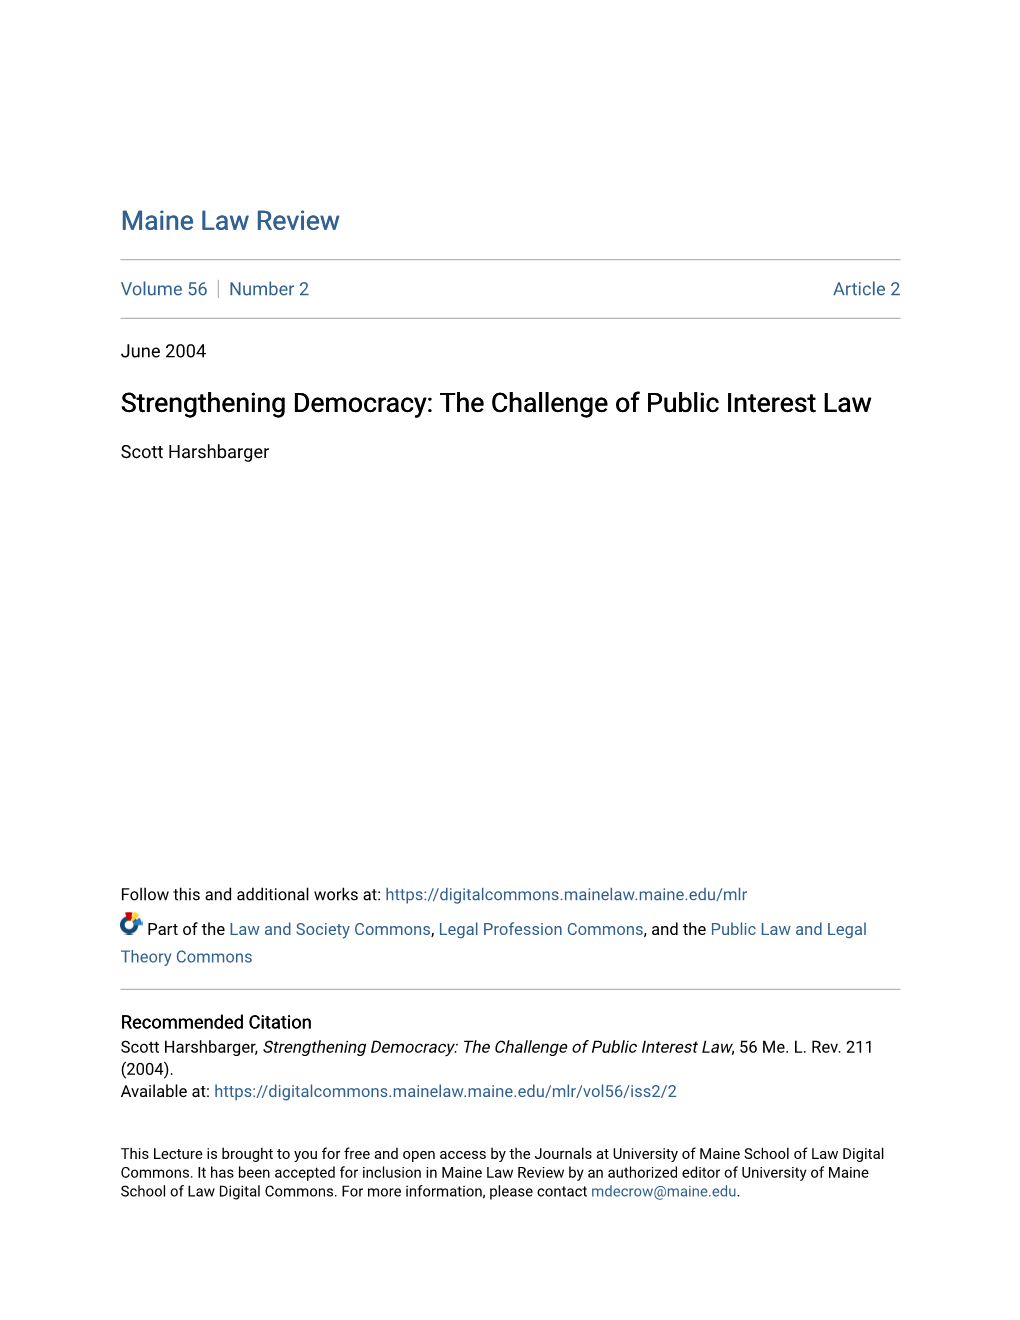 Strengthening Democracy: the Challenge of Public Interest Law